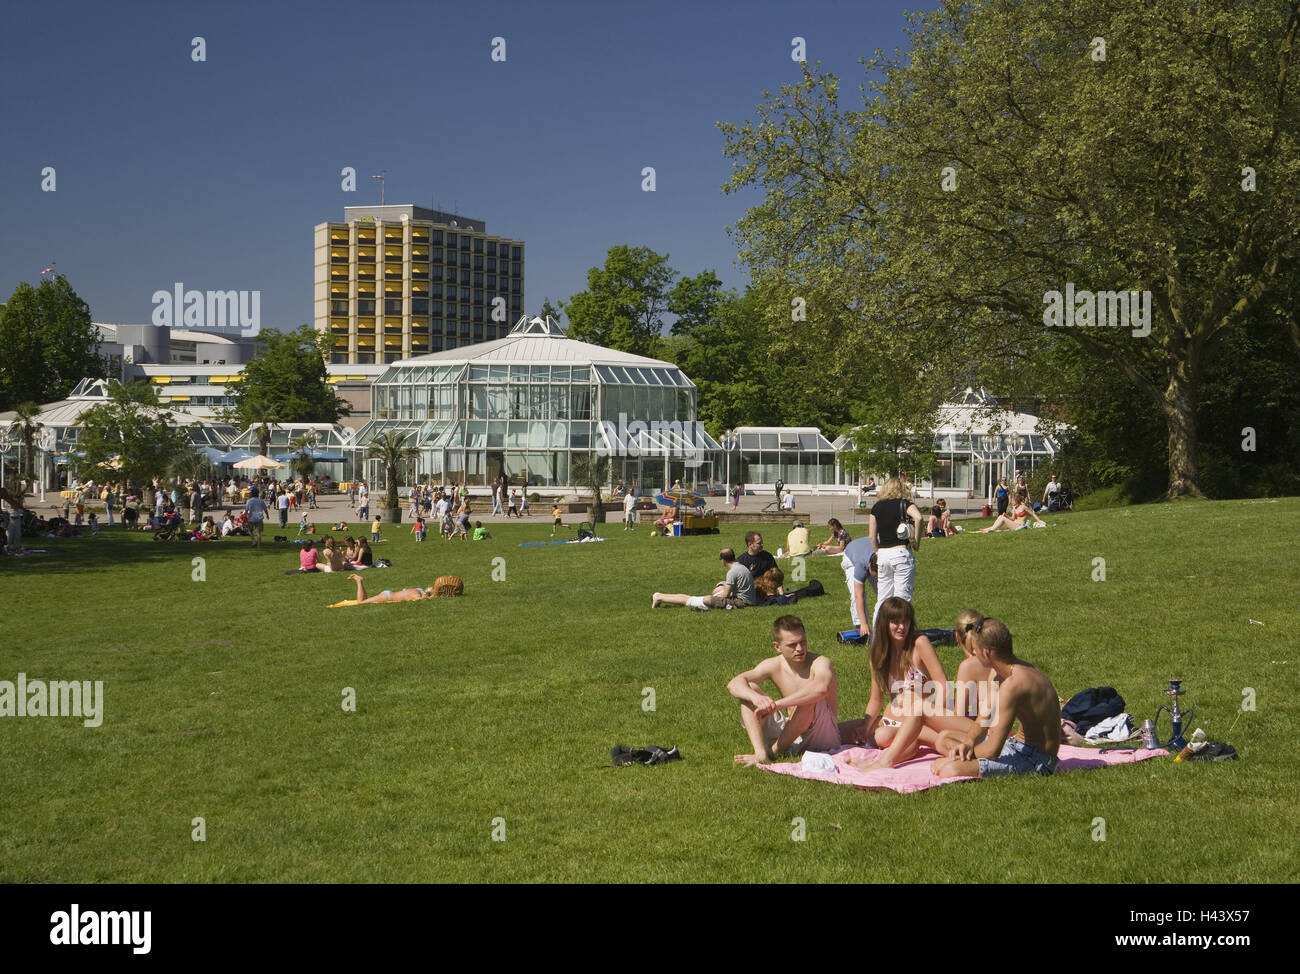 Germany, North Rhine-Westphalia, food, Grugapark, sunbathing area, person, park, building, pavilion, architecture, meadow, spring, summer, recreation, leisure time, rest, outside, Stock Photo